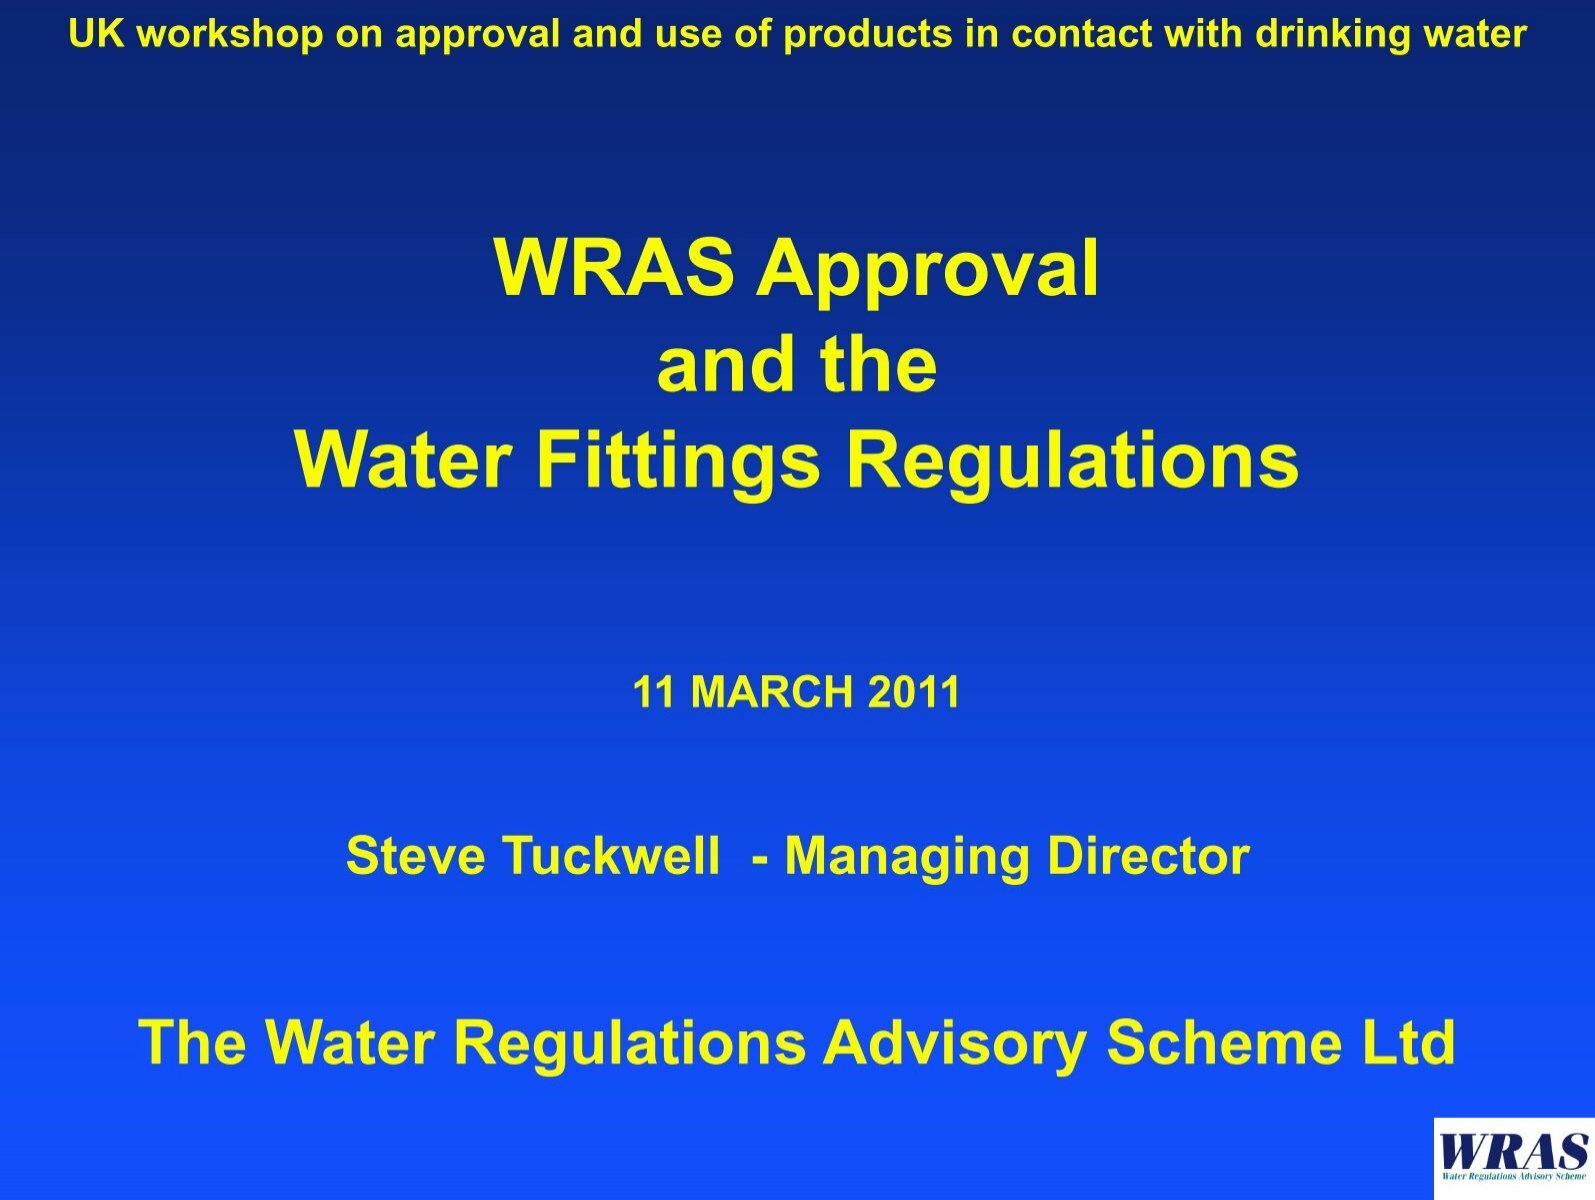 WRAS Approval and Water Fittings Regulations - Drinking Water